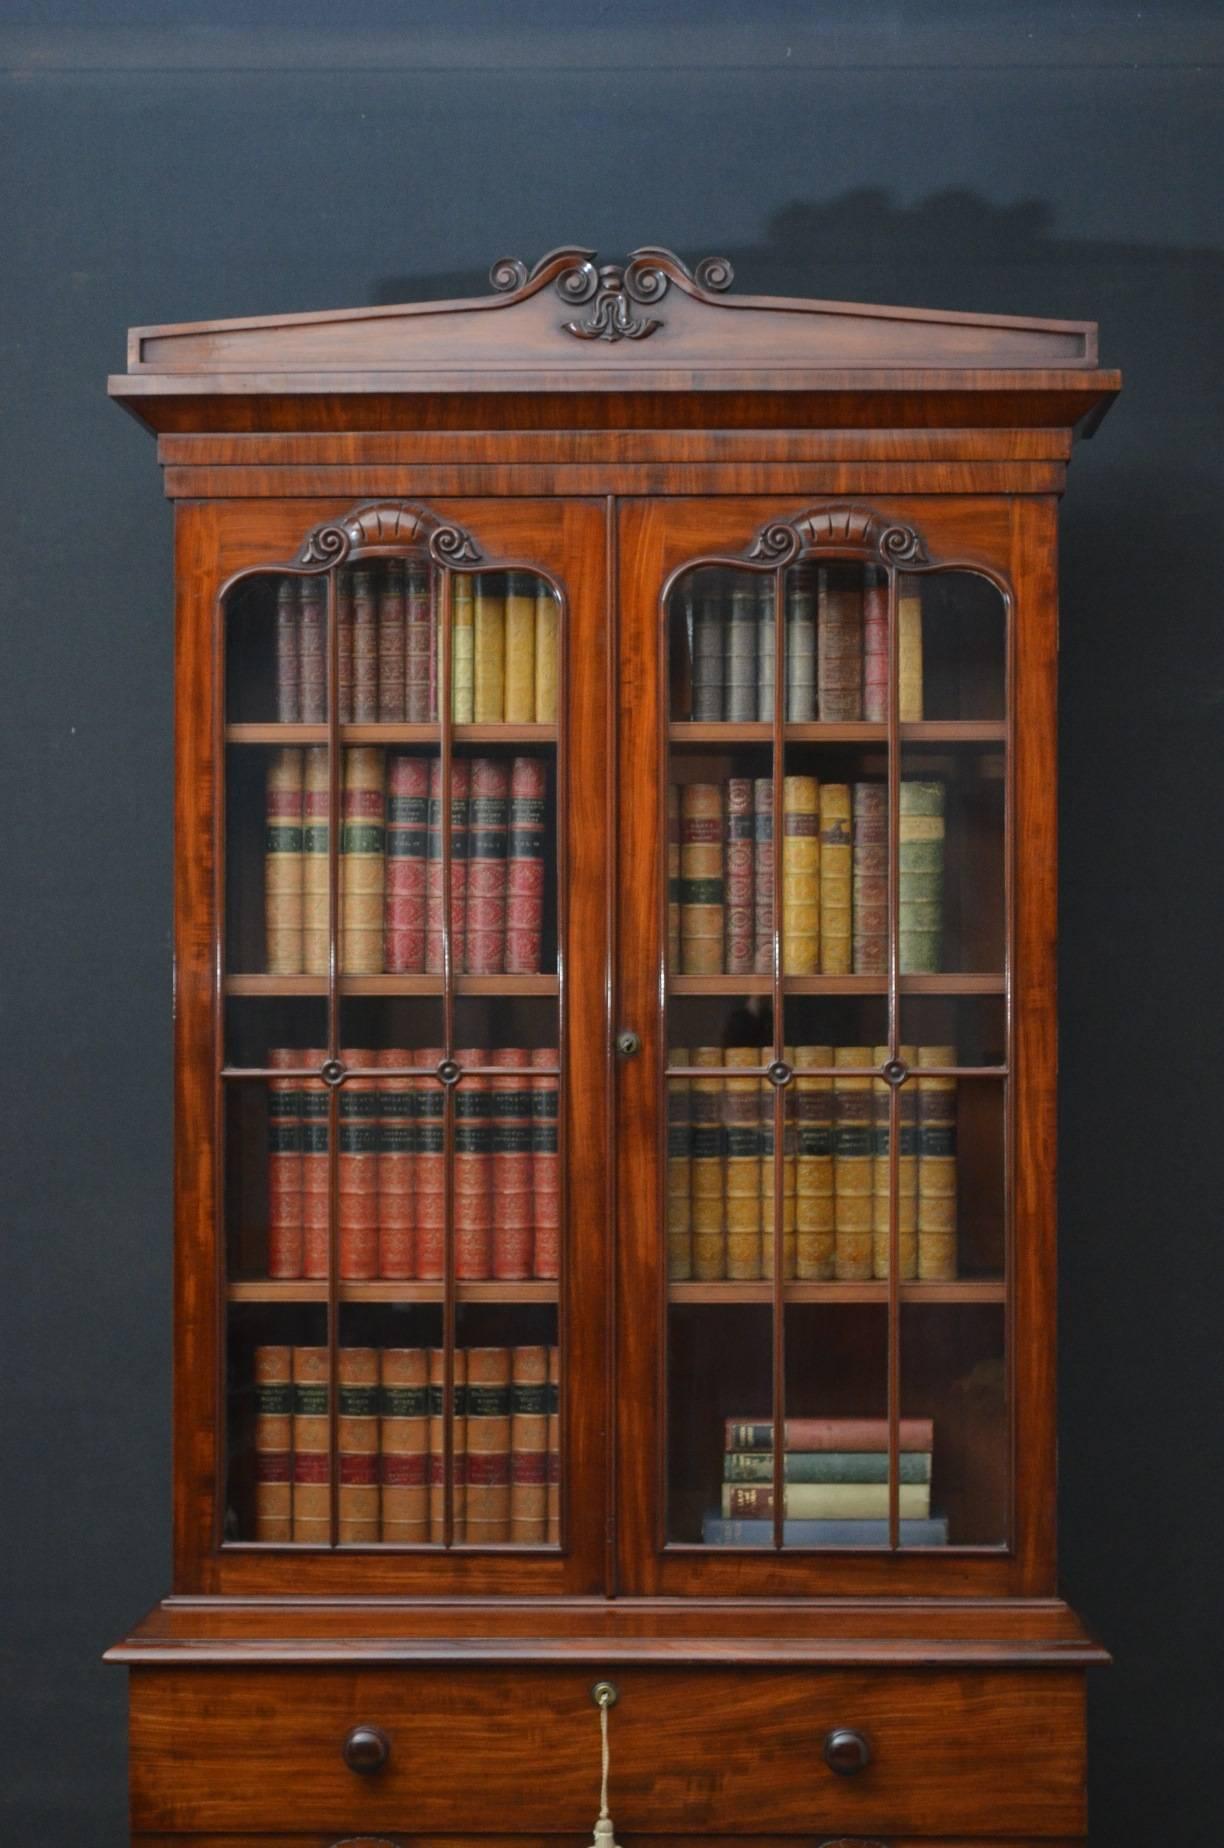 Sn4112 fine quality William IV mahogany bookcase of narrow proportions, having architectural pediment above a pair of glazed doors enclosing 3 height adjustable shelves and fitted with working lock and a key, the base having mahogany lined drawer